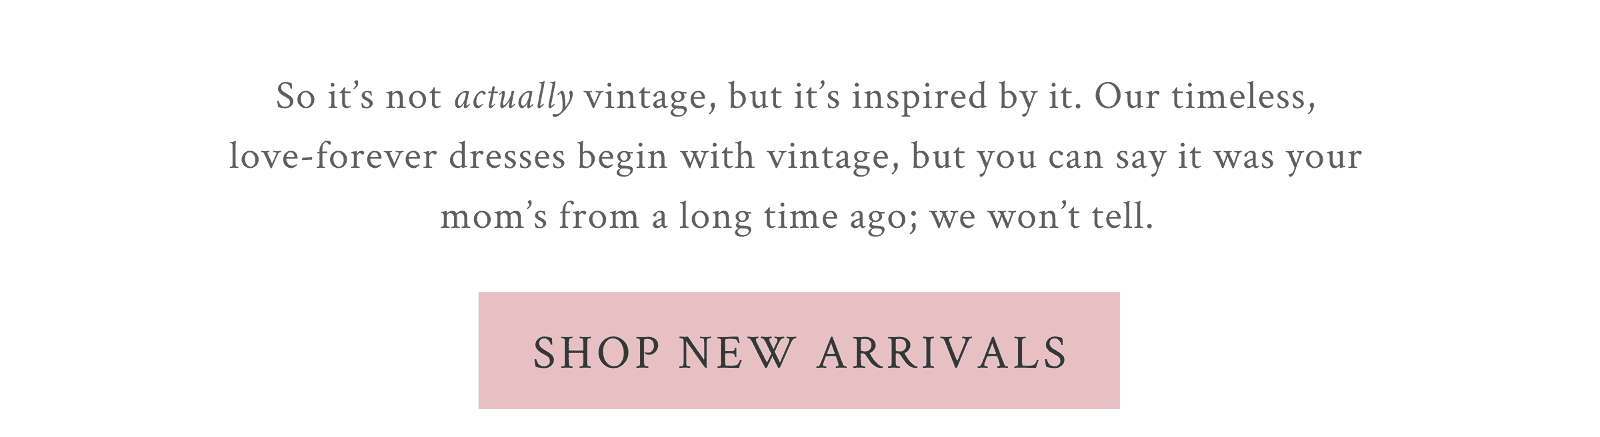 So it’s not actually vintage, but it’s inspired by it. Our timeless, love-forever dresses begin with vintage, but you can say it was your mom’s from a long time ago; we won’t tell.